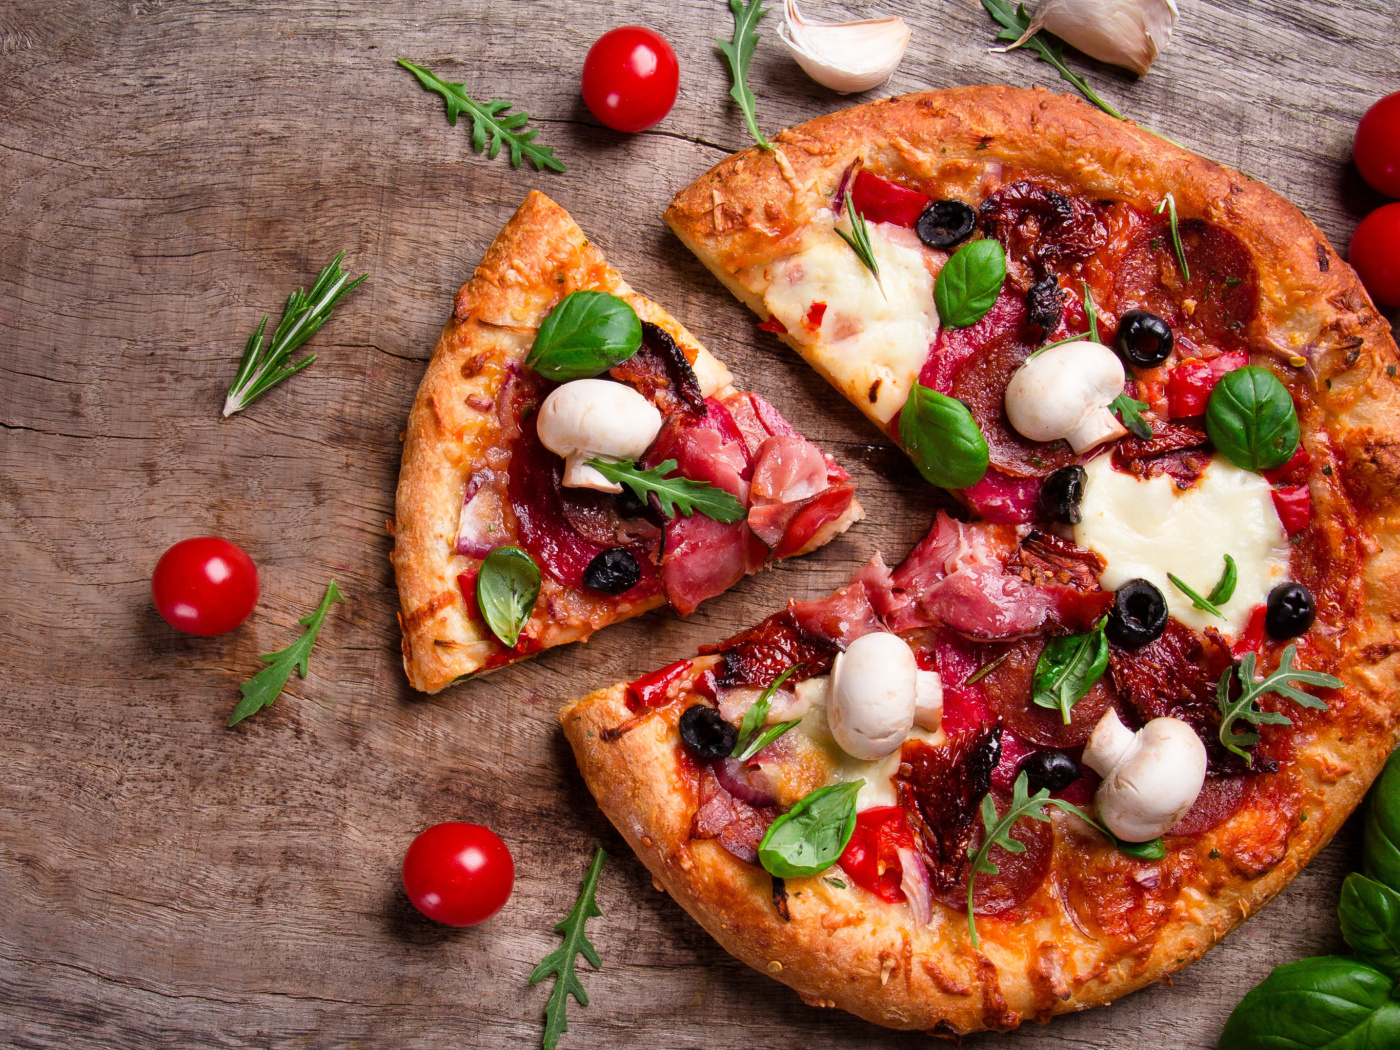 Das Pizza with mushrooms and olives Wallpaper 1400x1050